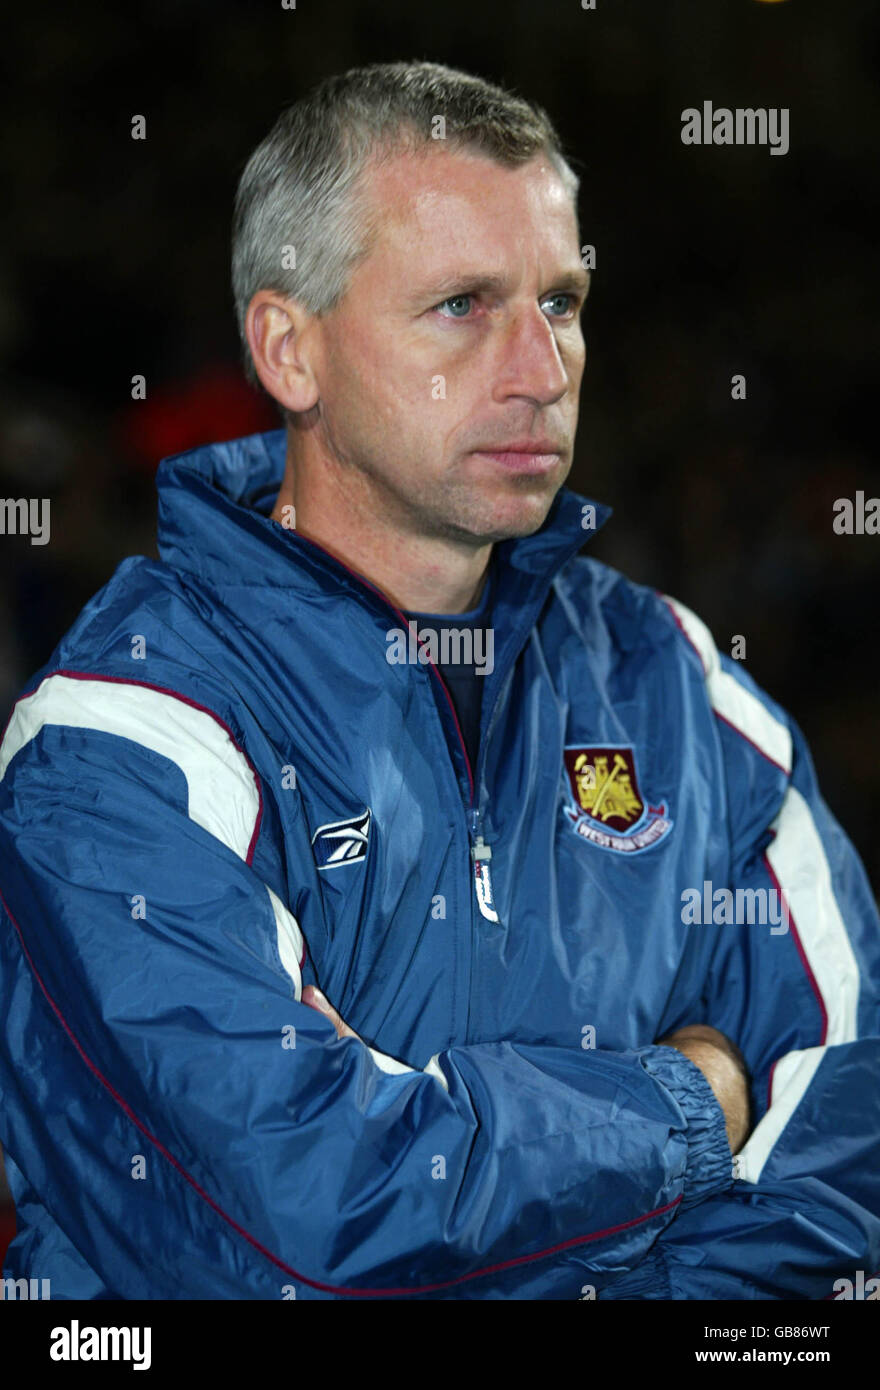 Soccer - Nationwide League Division One - West Ham United v Nottingham Forest. West Ham United's new manager Alan Pardew during his first game in charge Stock Photo